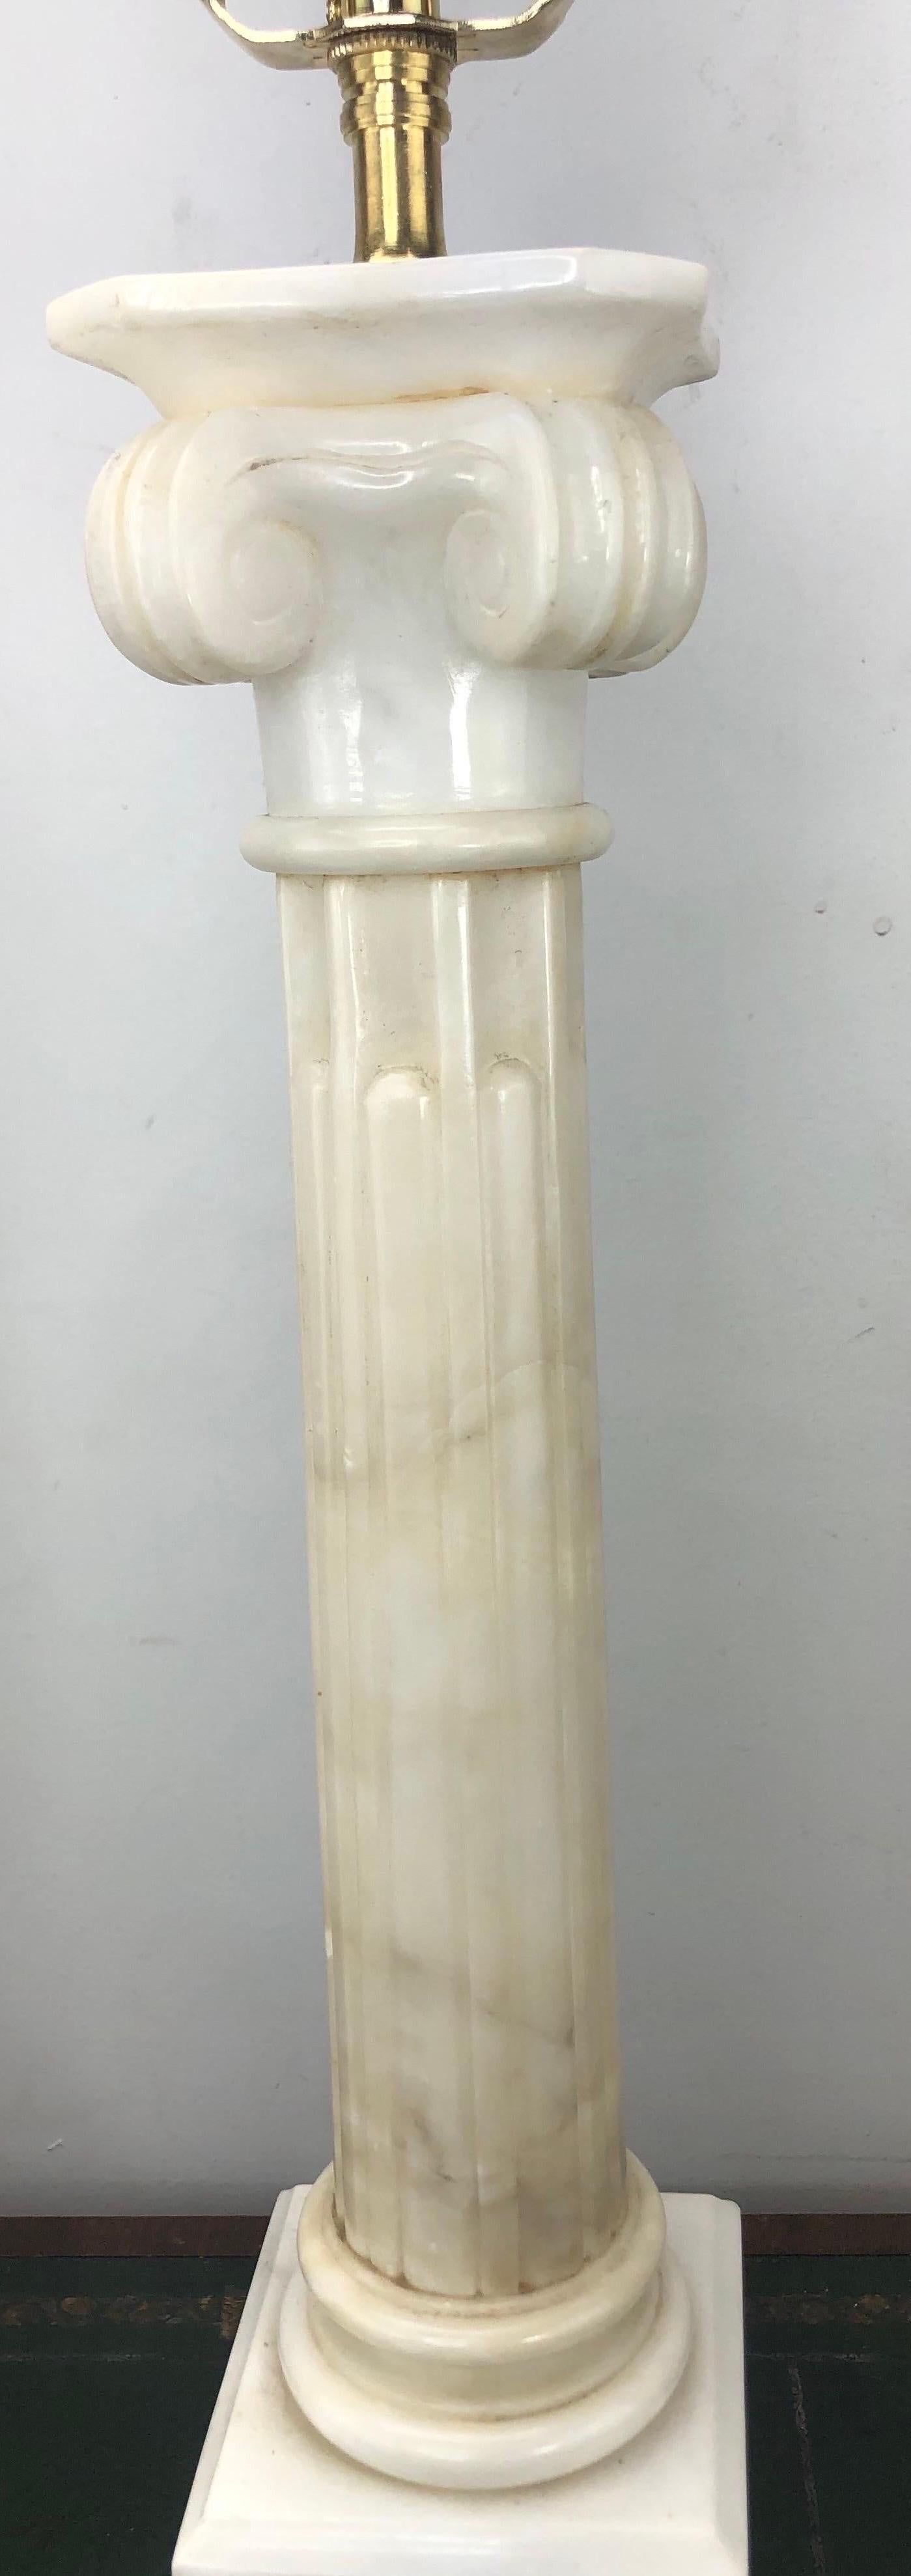 Pair of Large Vintage Italian Alabaster Column Lamps with Ionic Capitals For Sale 4